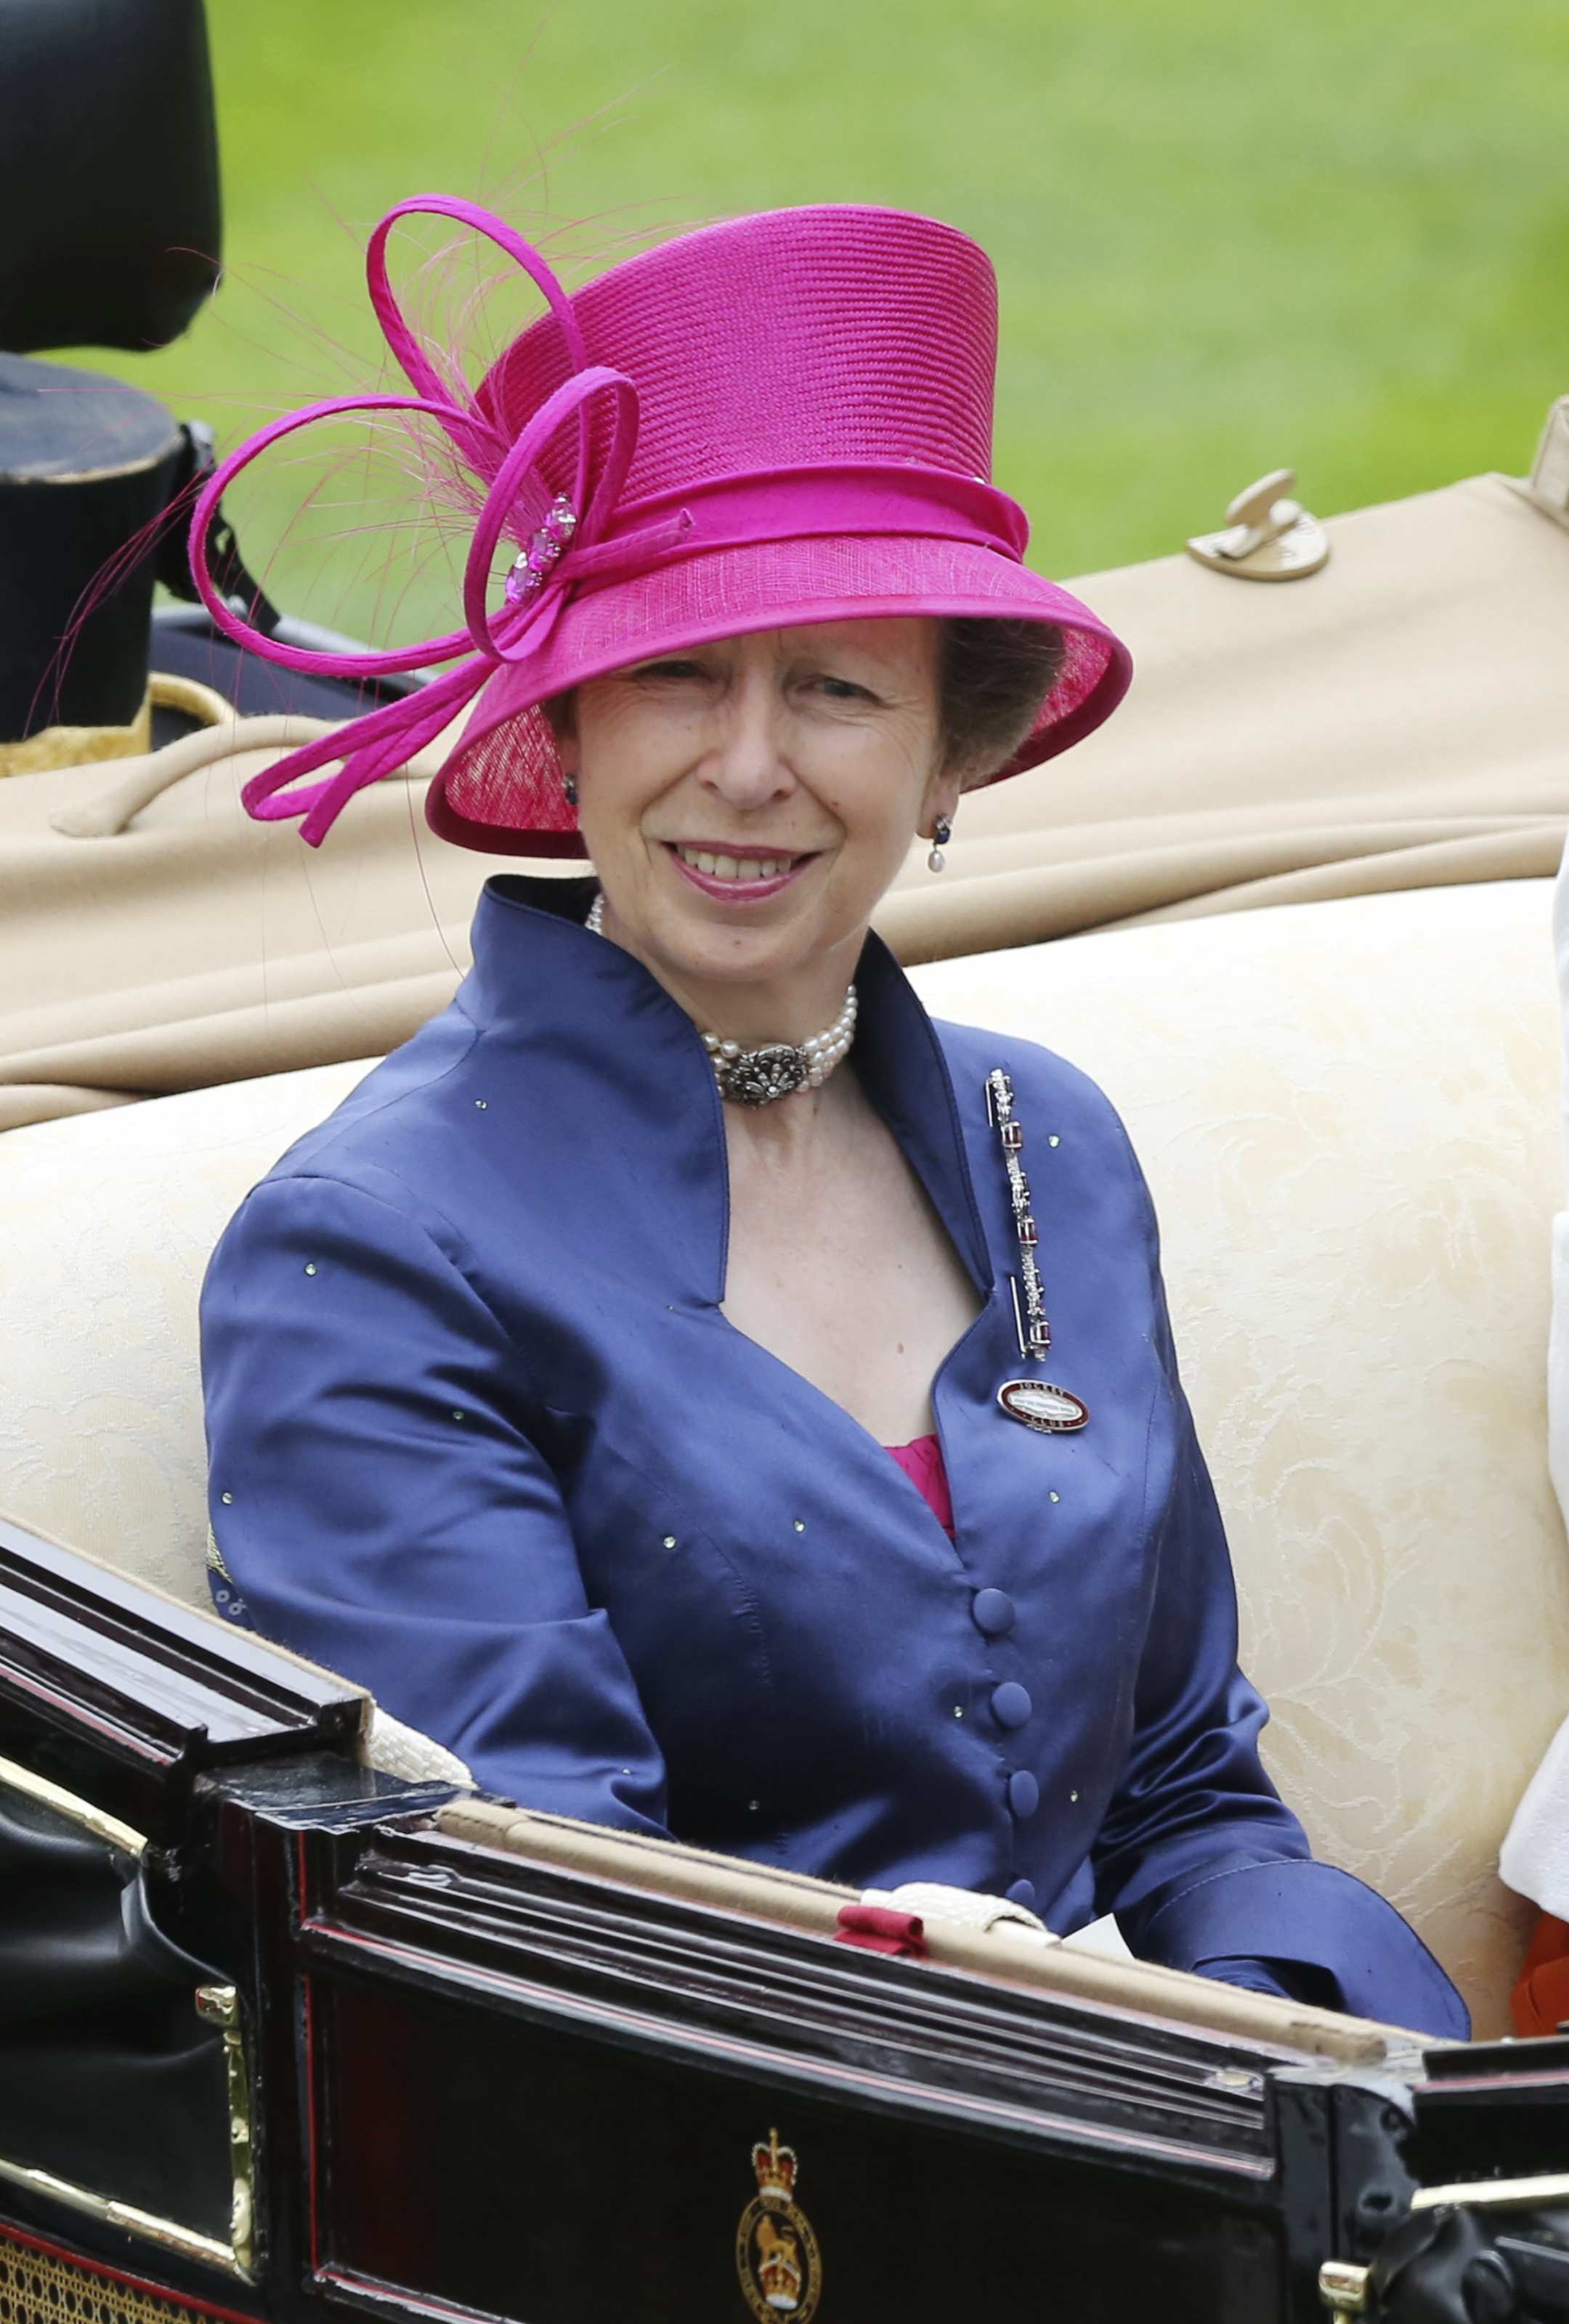 CHIO Aachen goes Royal: Her RoyaL Highness Princess Anne will attend the opening ceremony